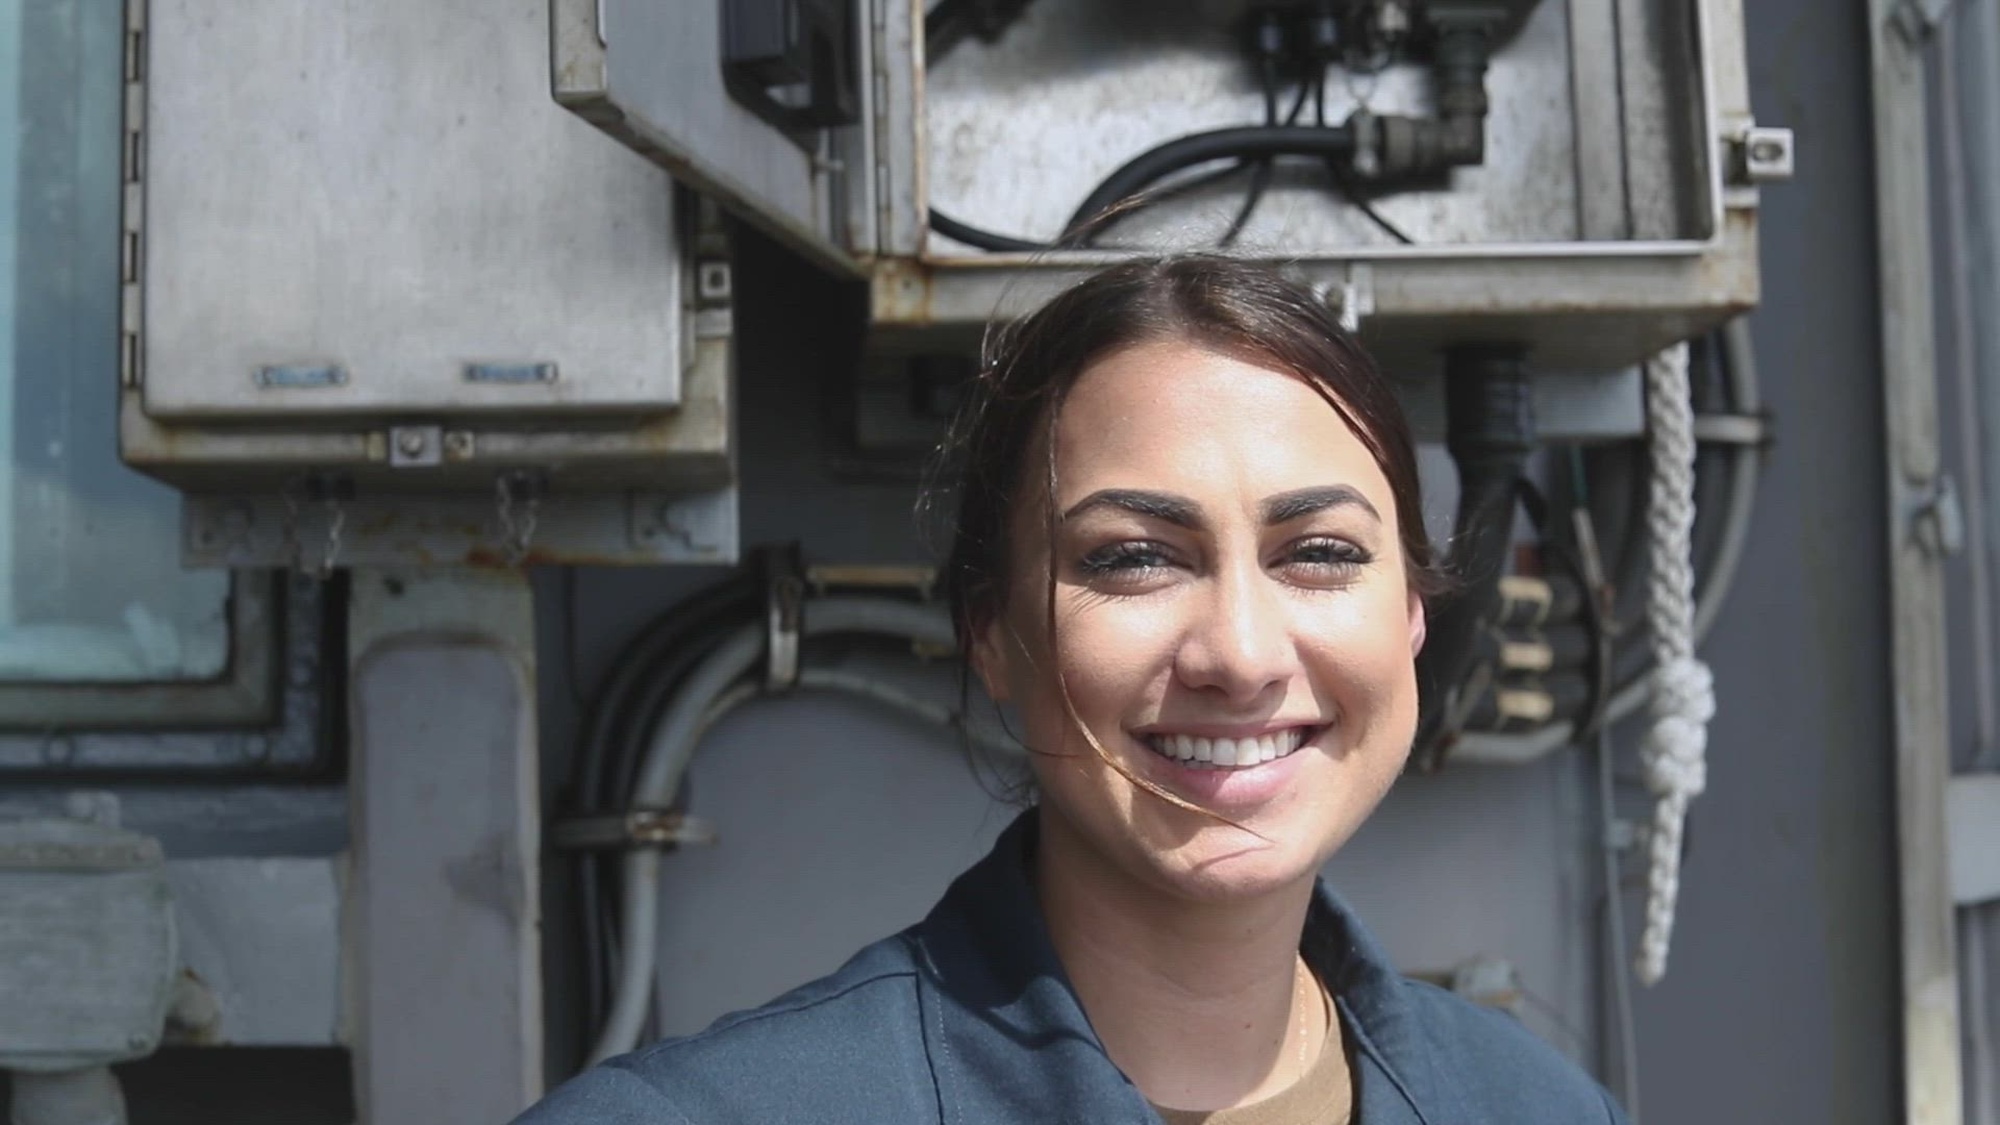 PHILIPPINE SEA (Mar. 13, 2022) Interior Communications Electrician 3rd Class Lauren Ezell, and Lt. Cmdr. Ashly Wisniewski speak about naval heritage in celebration of women's history month. (U.S. Navy video by Mass Communication Specialist 2nd Class Louis Lea)